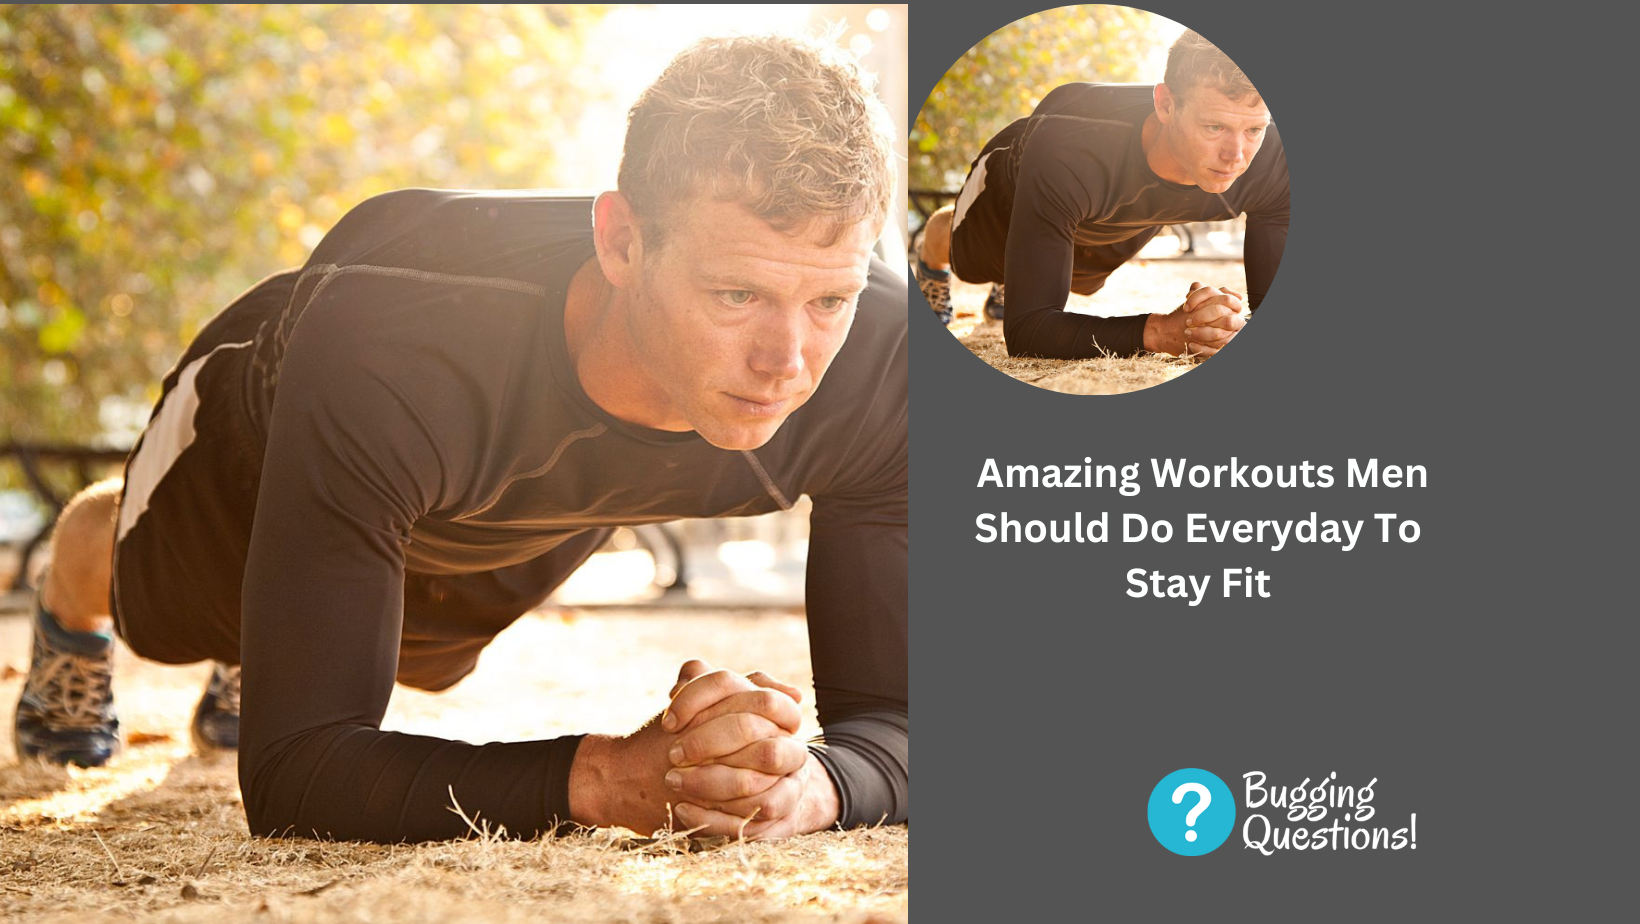 5 Amazing Workouts Men Should Do Everyday To Stay Fit- Here Is What To Know